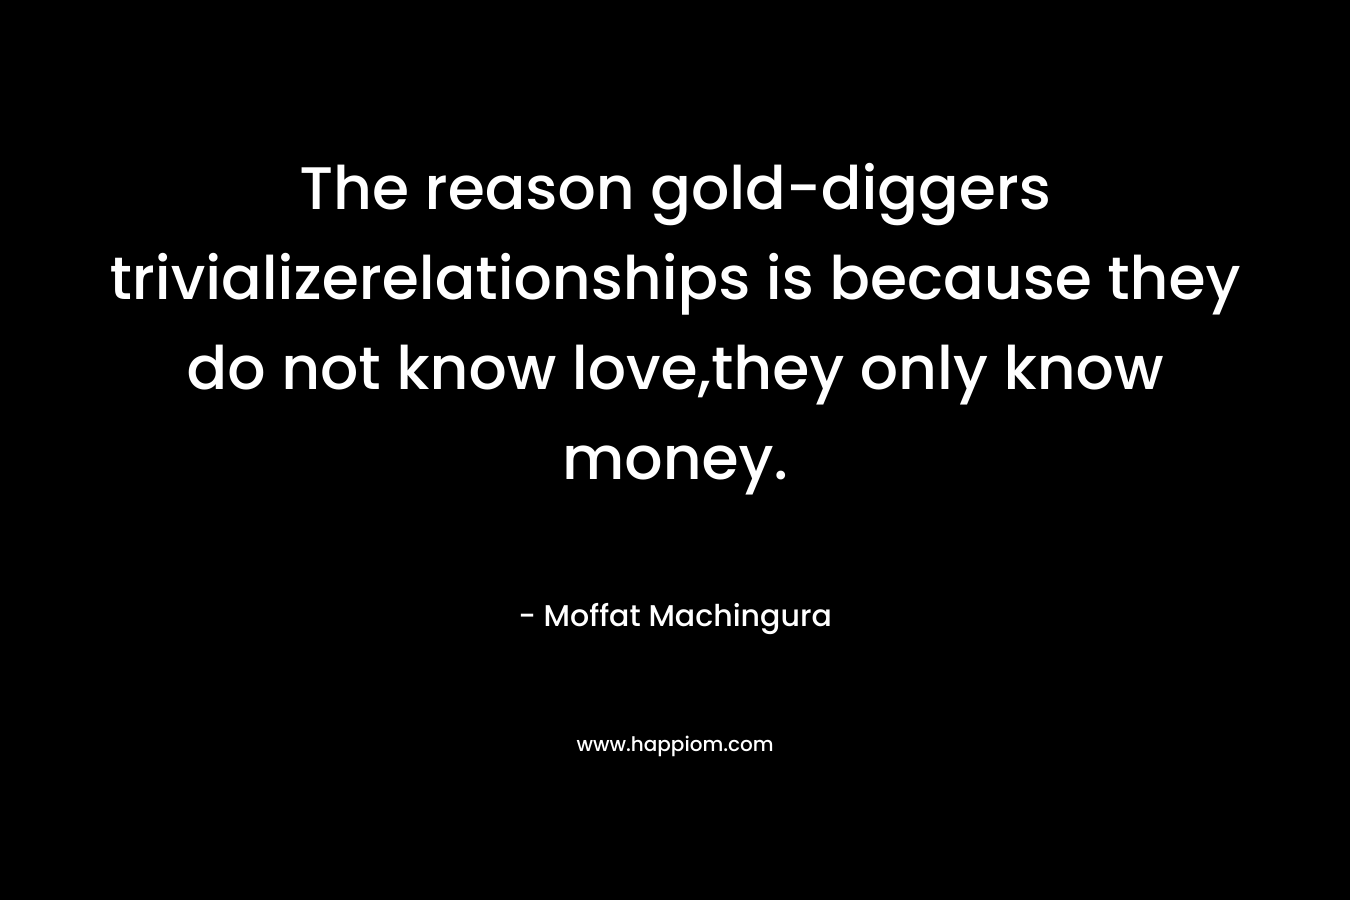 The reason gold-diggers trivializerelationships is because they do not know love,they only know money.